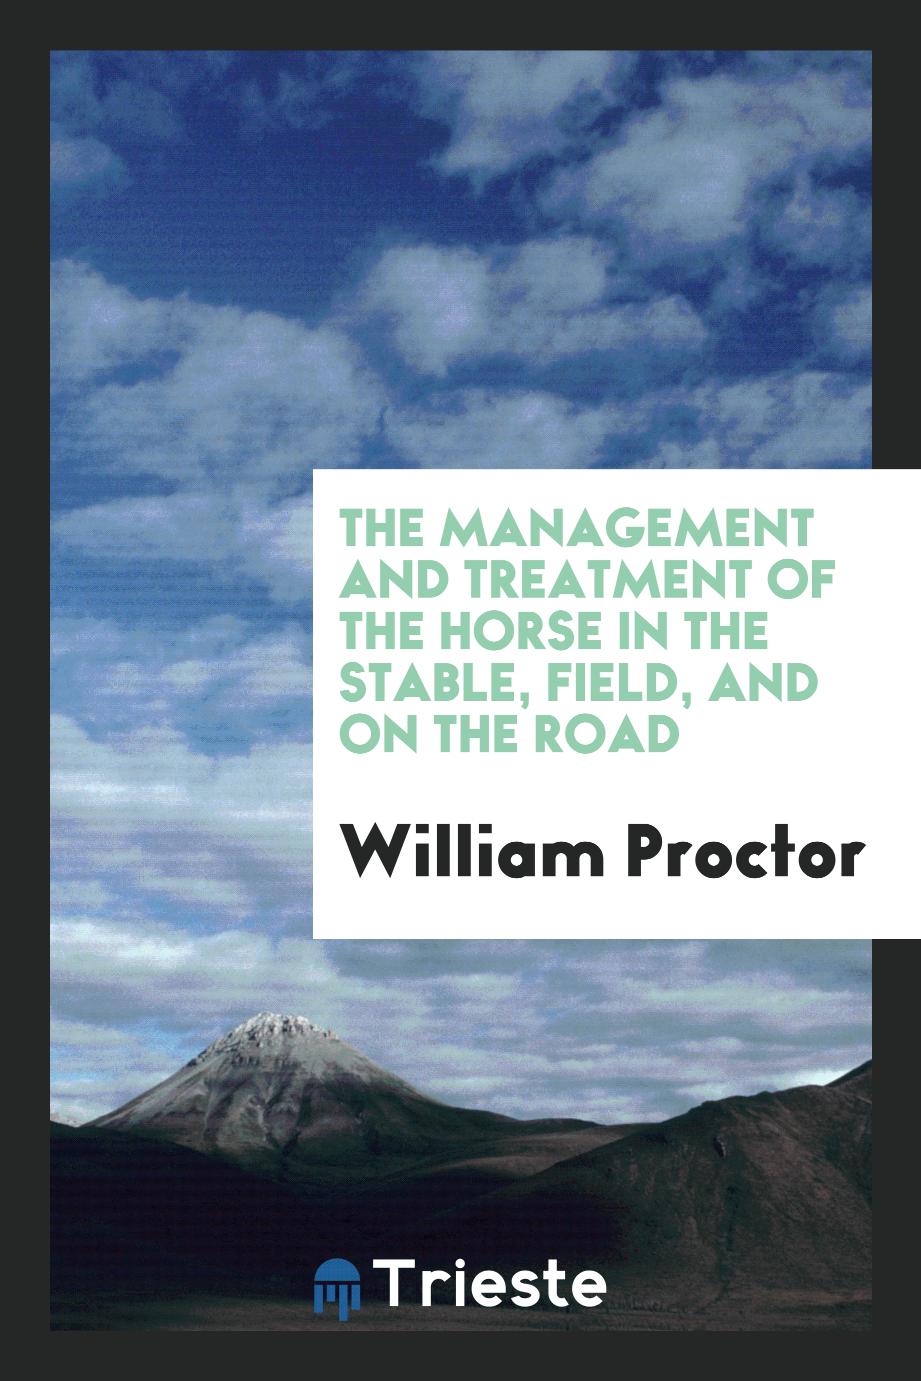 The management and treatment of the horse in the stable, field, and on the road